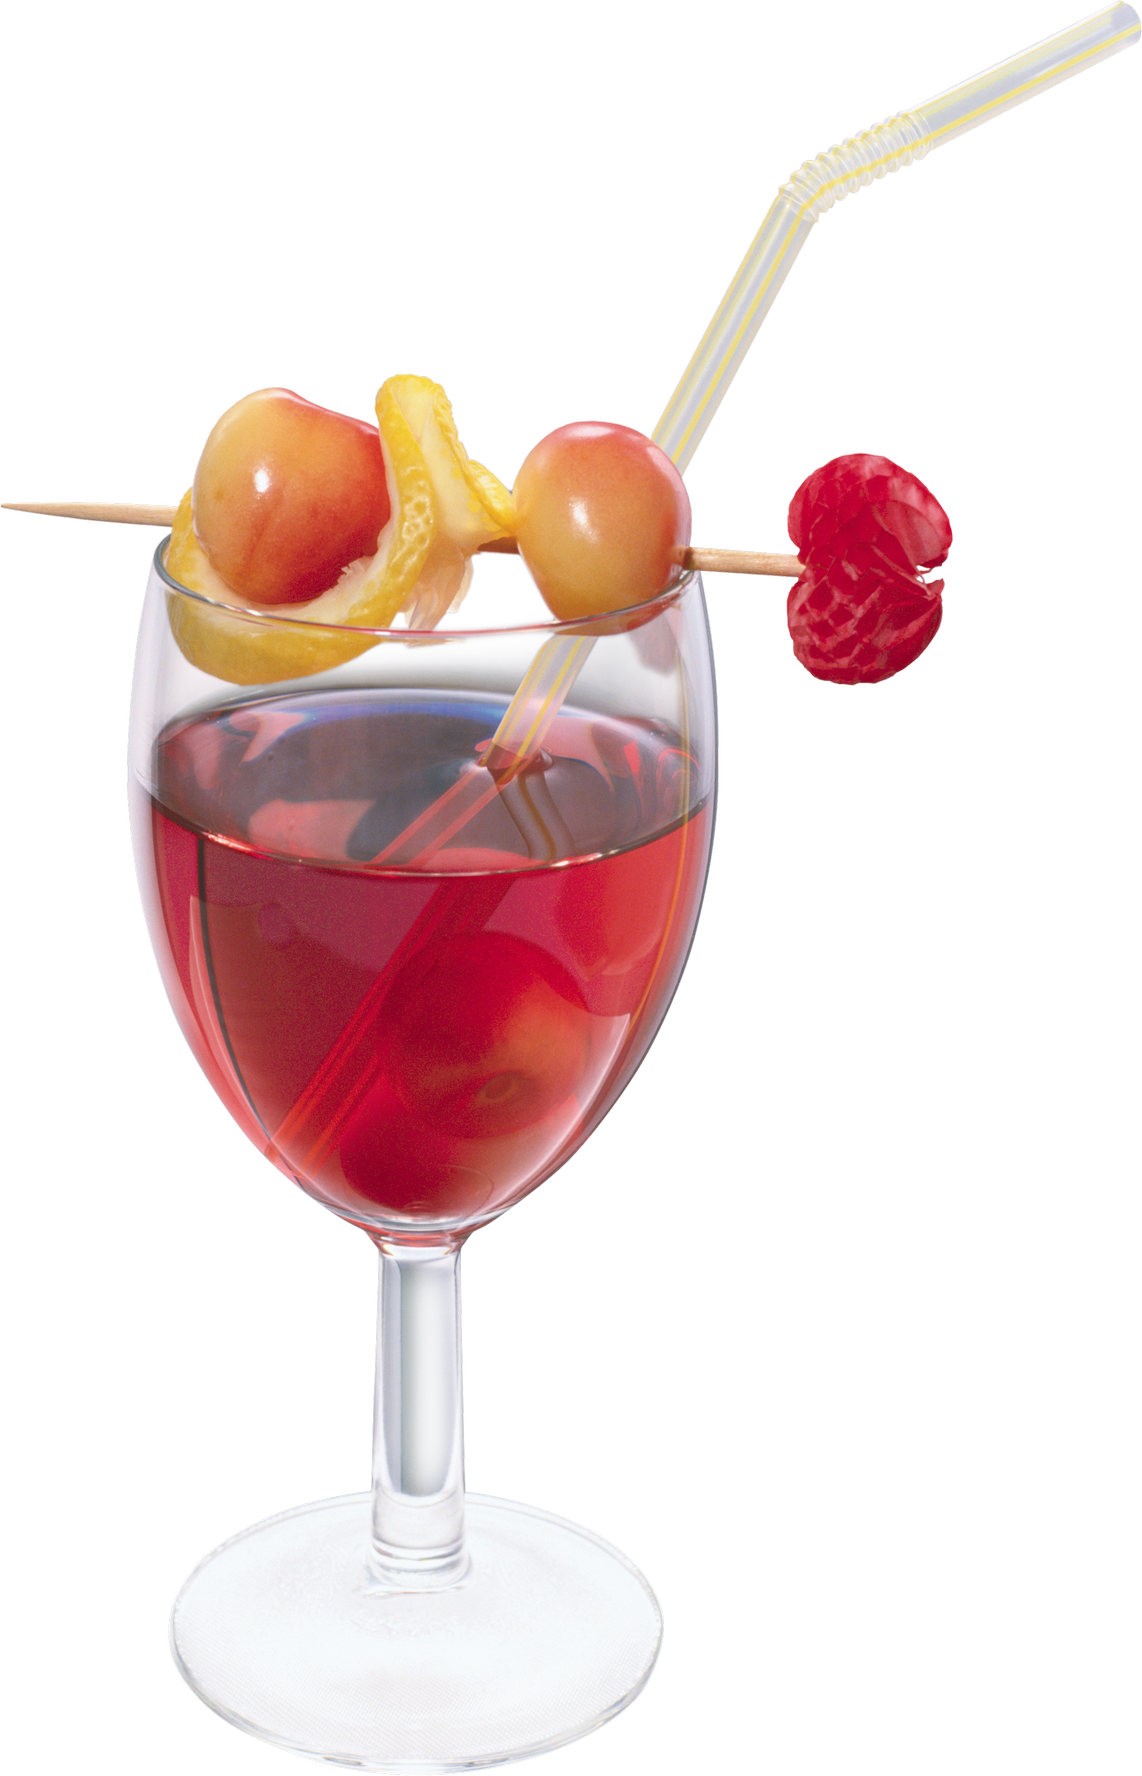 Download Wine Glass PNG Image for Free